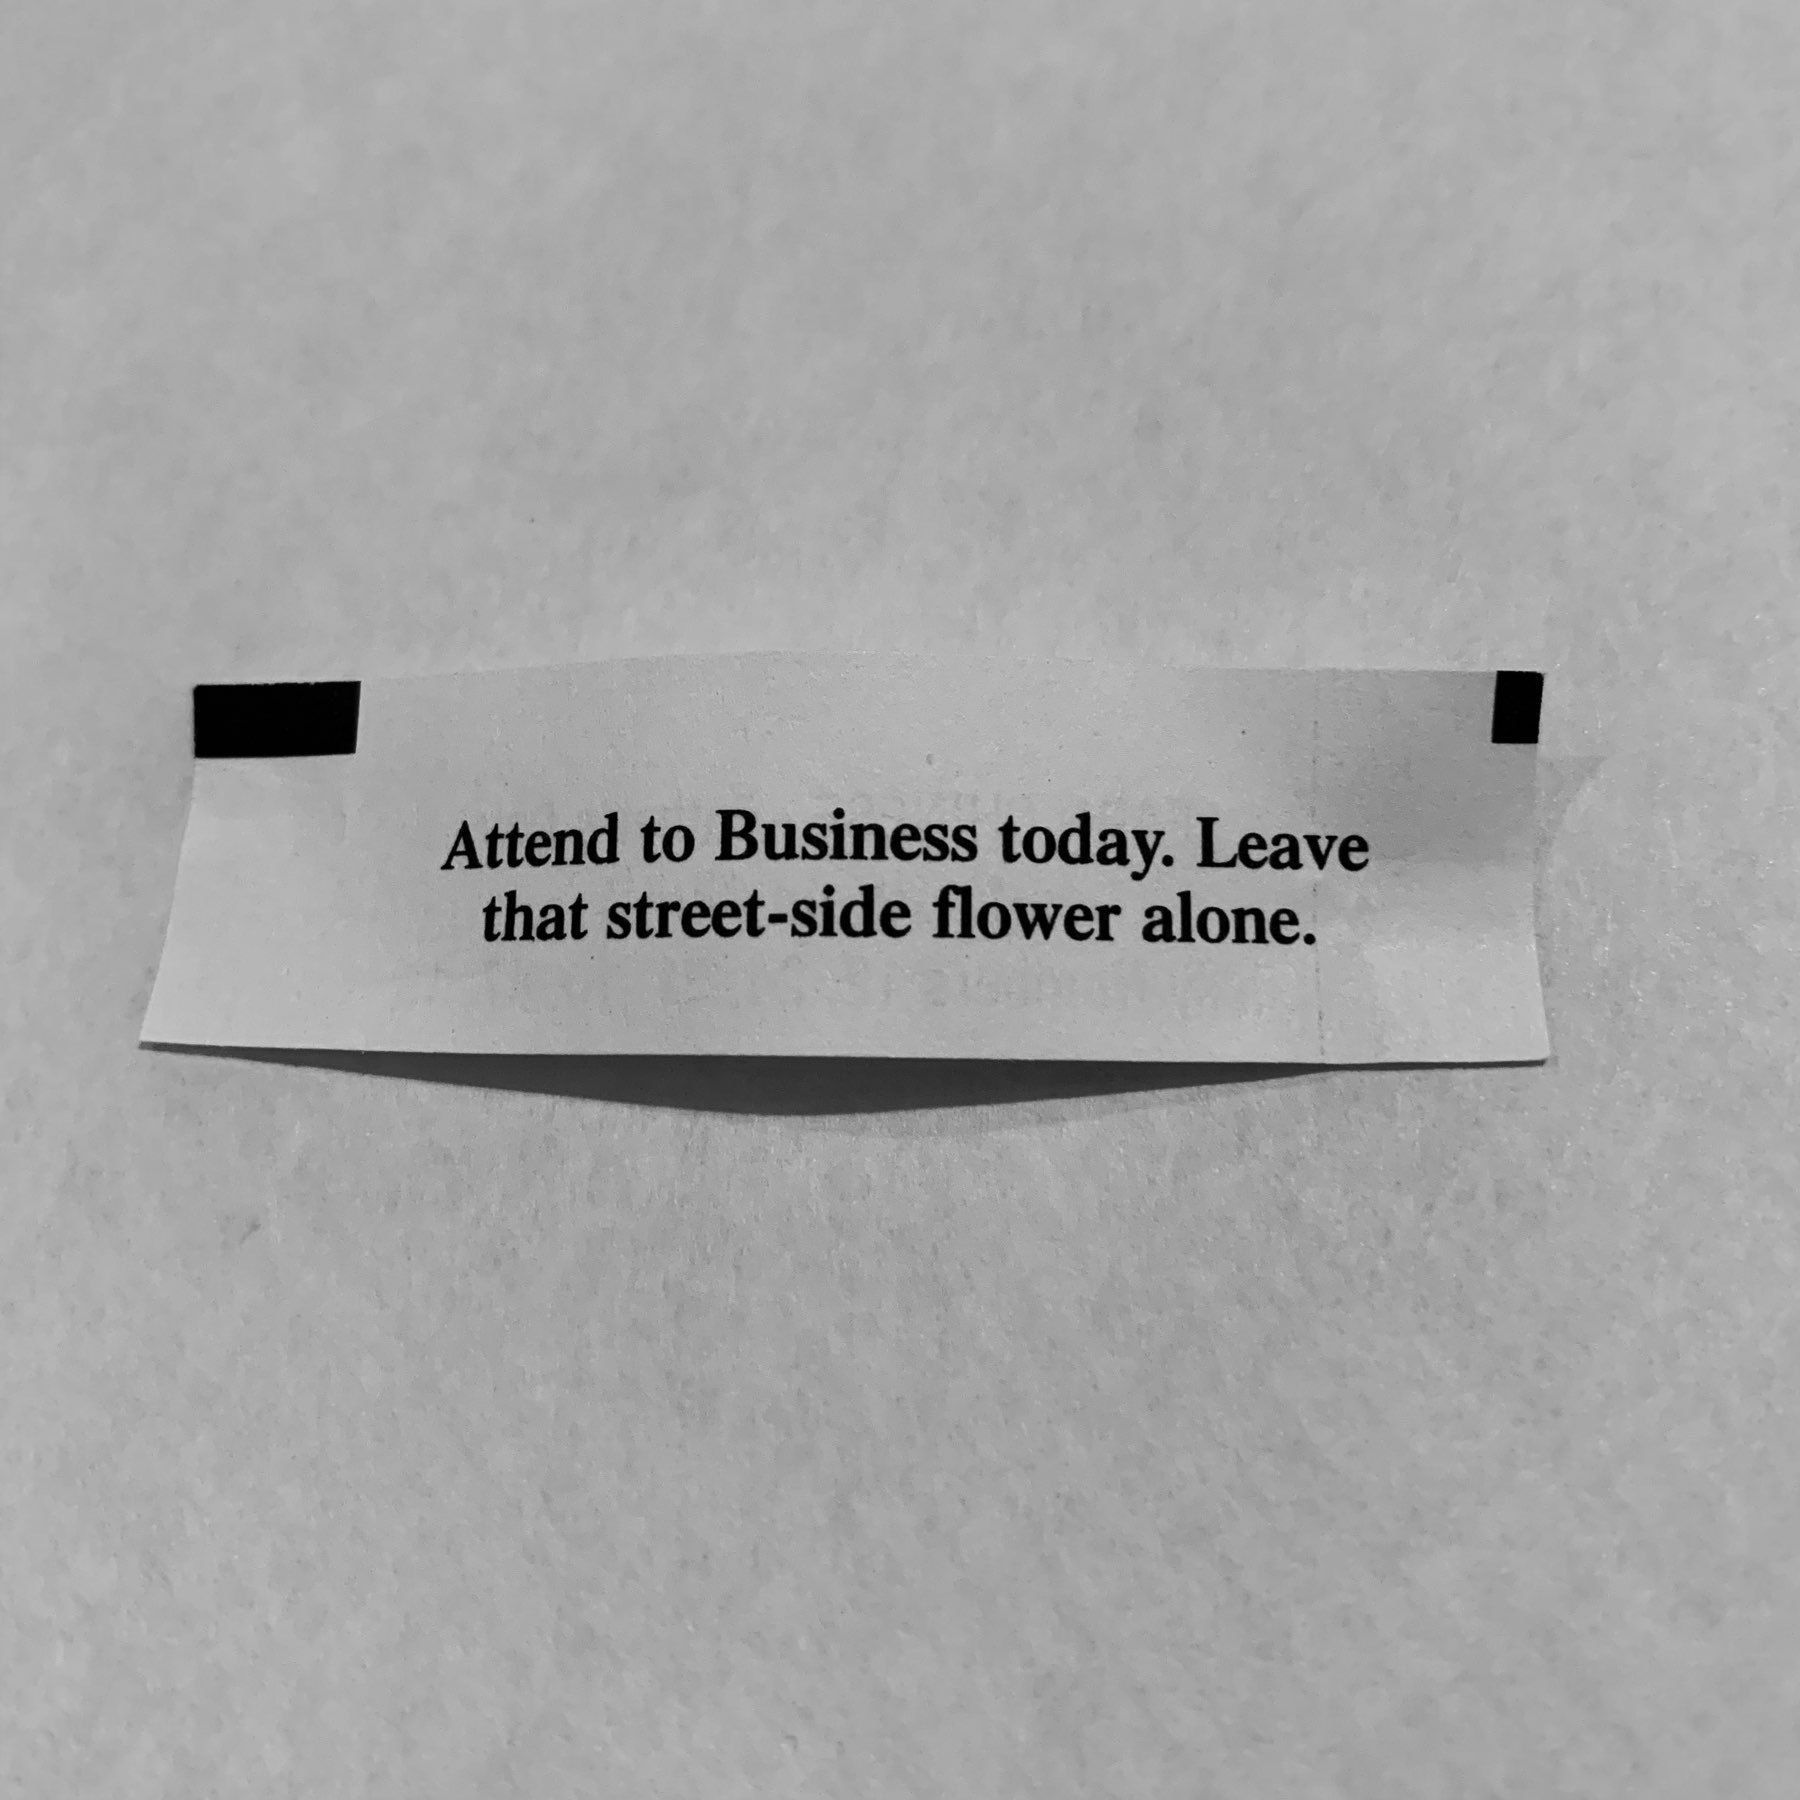 Fortune reading 'Attend to Business today. leave that street-side flower alone.'